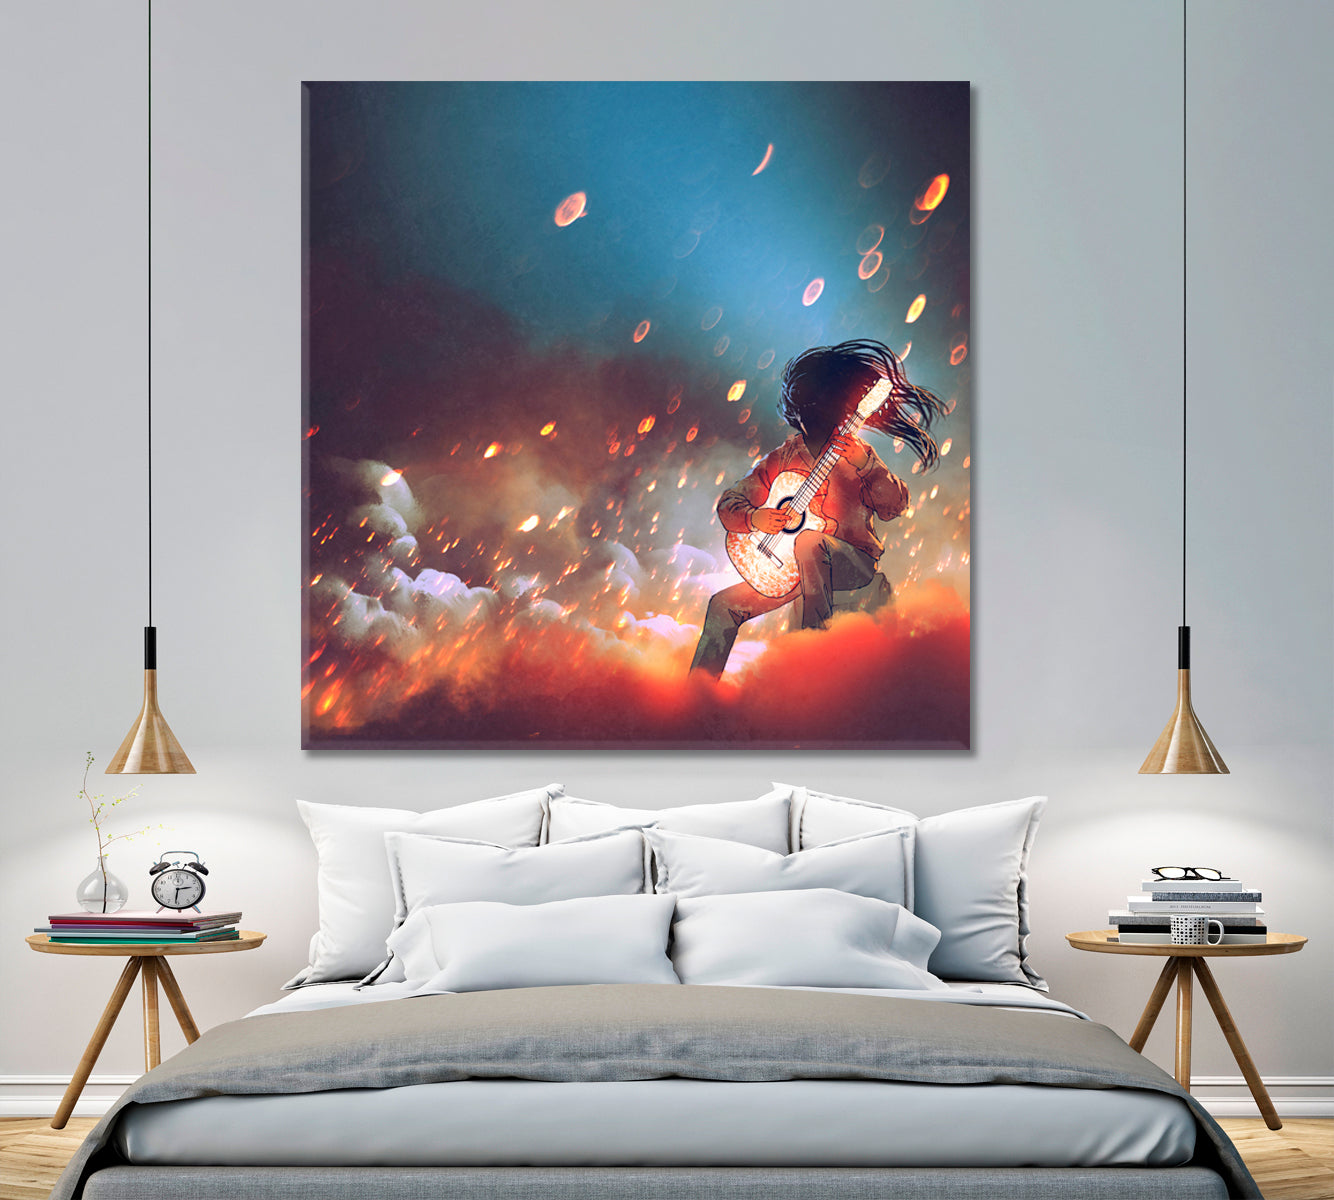 SURREAL Mysterious Man Playing the Glowing Guitar in the Smoke - Square Panel Surreal Fantasy Large Art Print Décor Artesty 1 Panel 12"x12" 